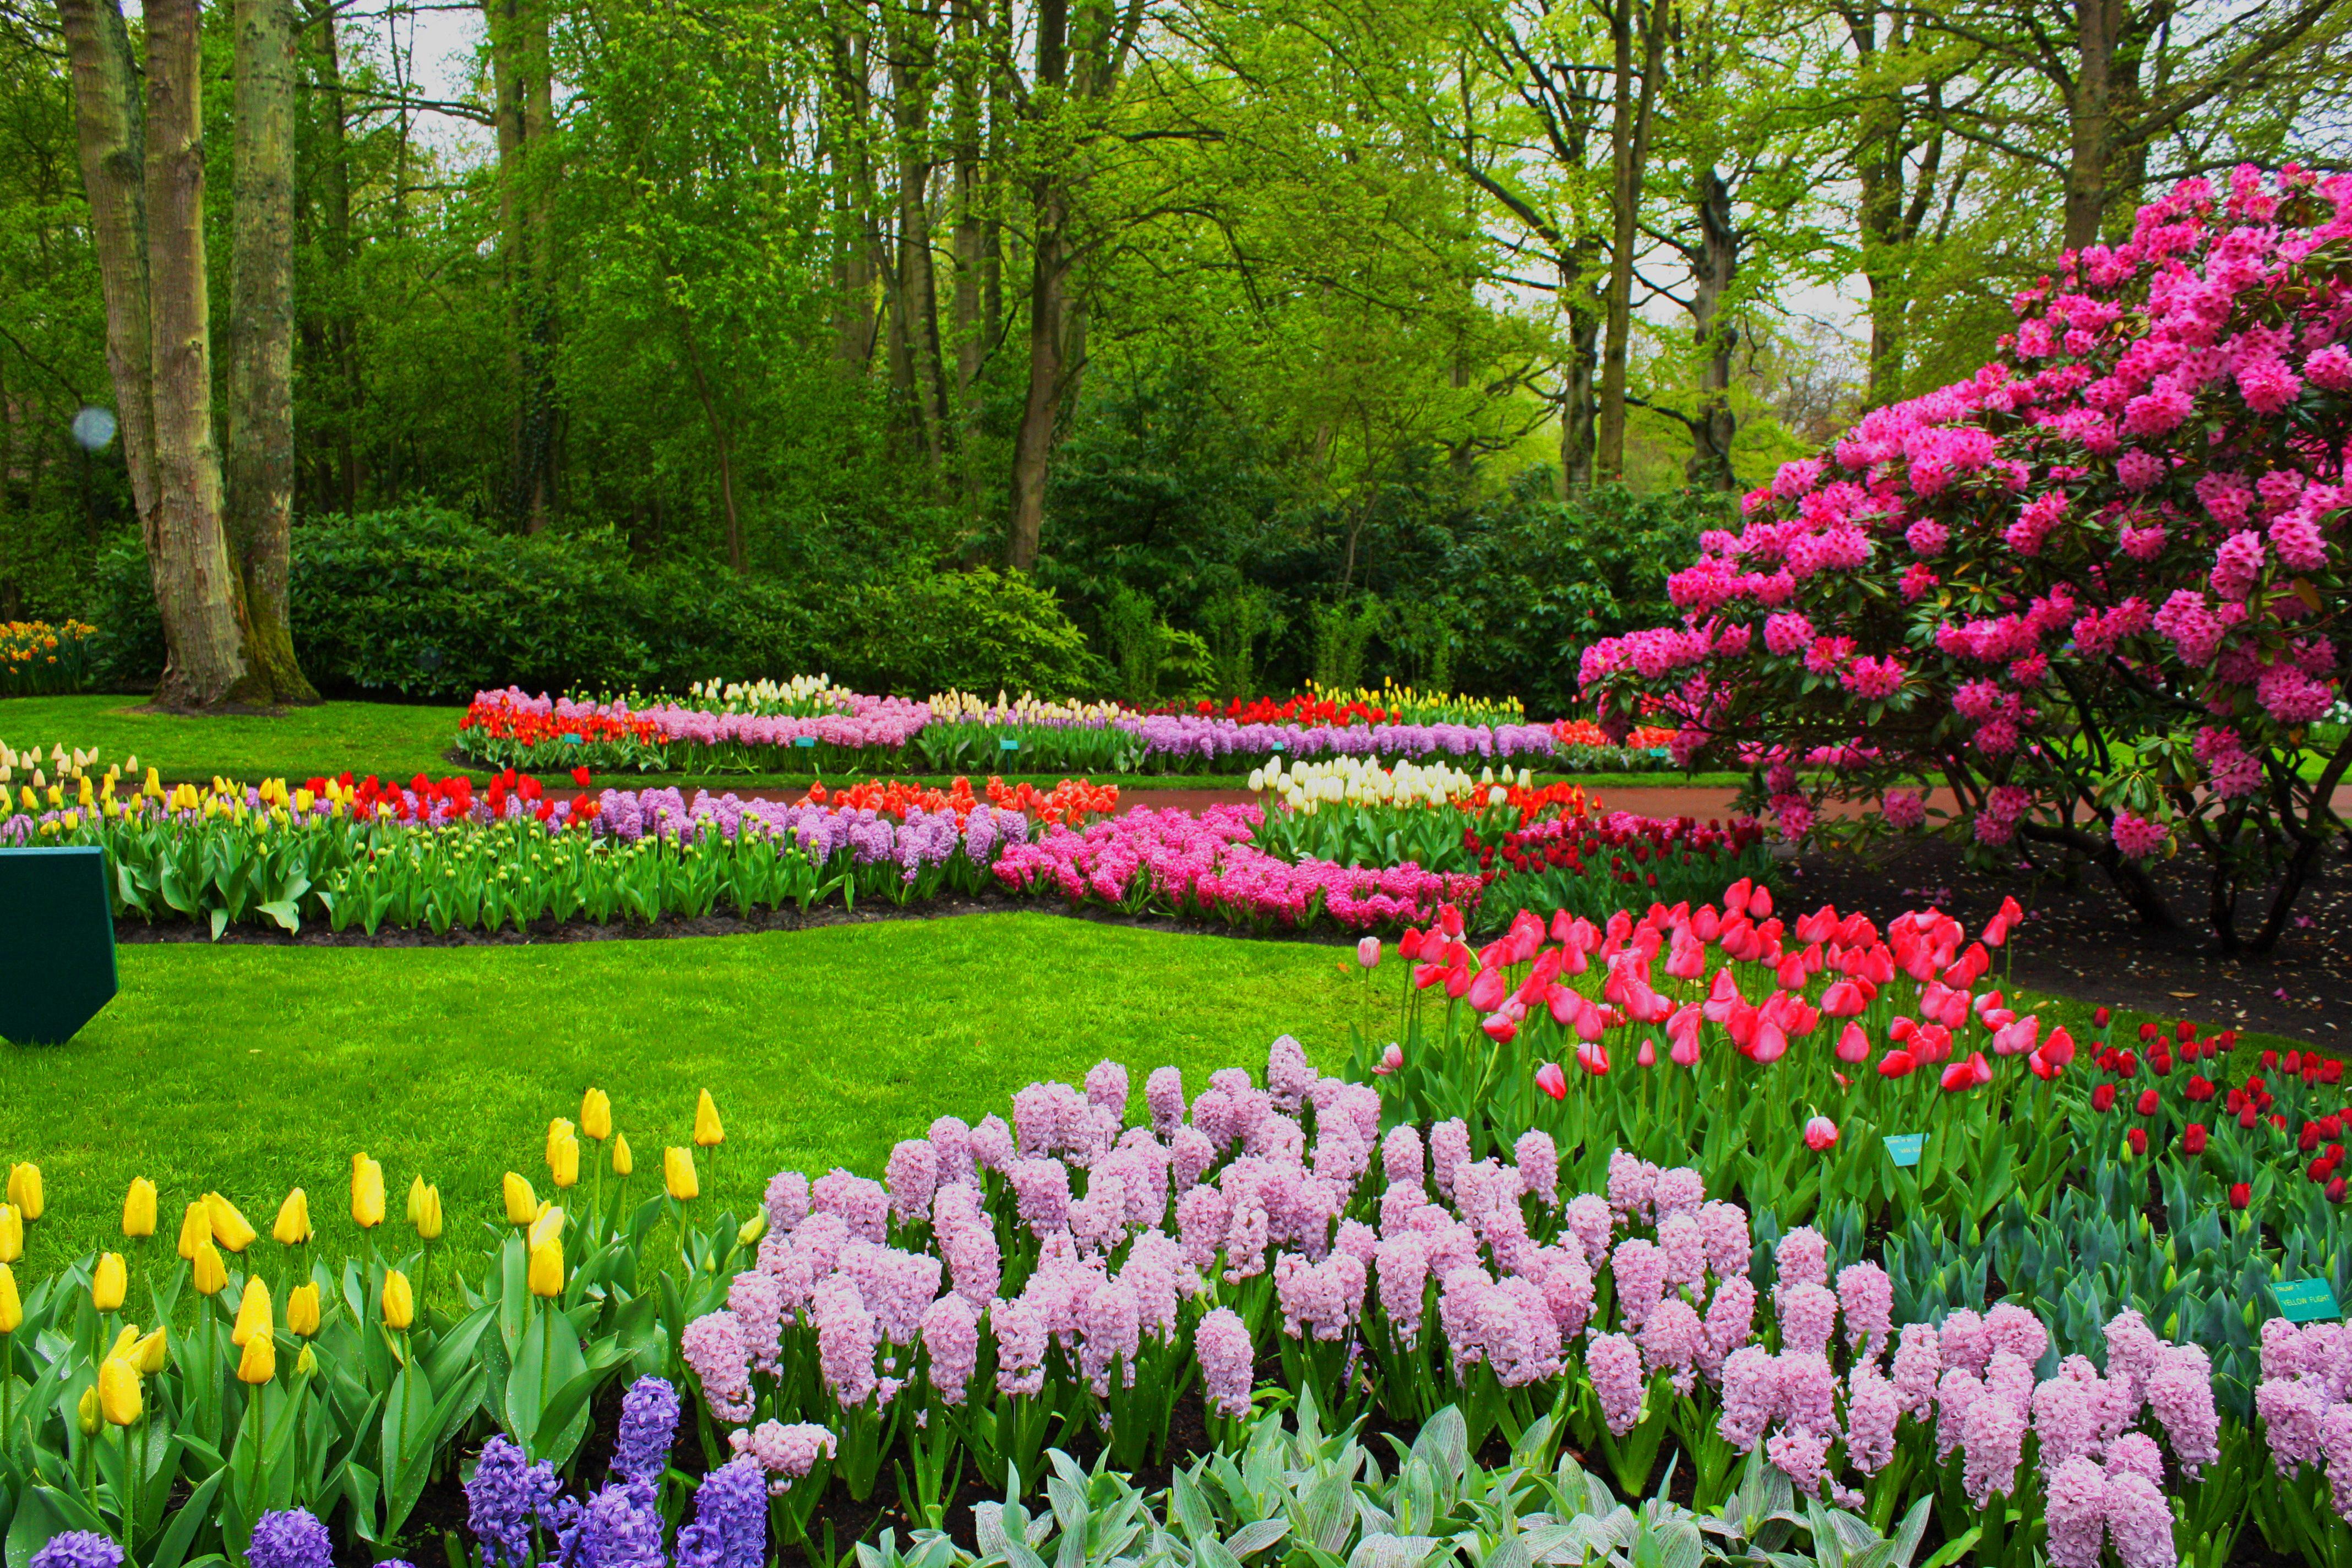 Spring Flowers in a park